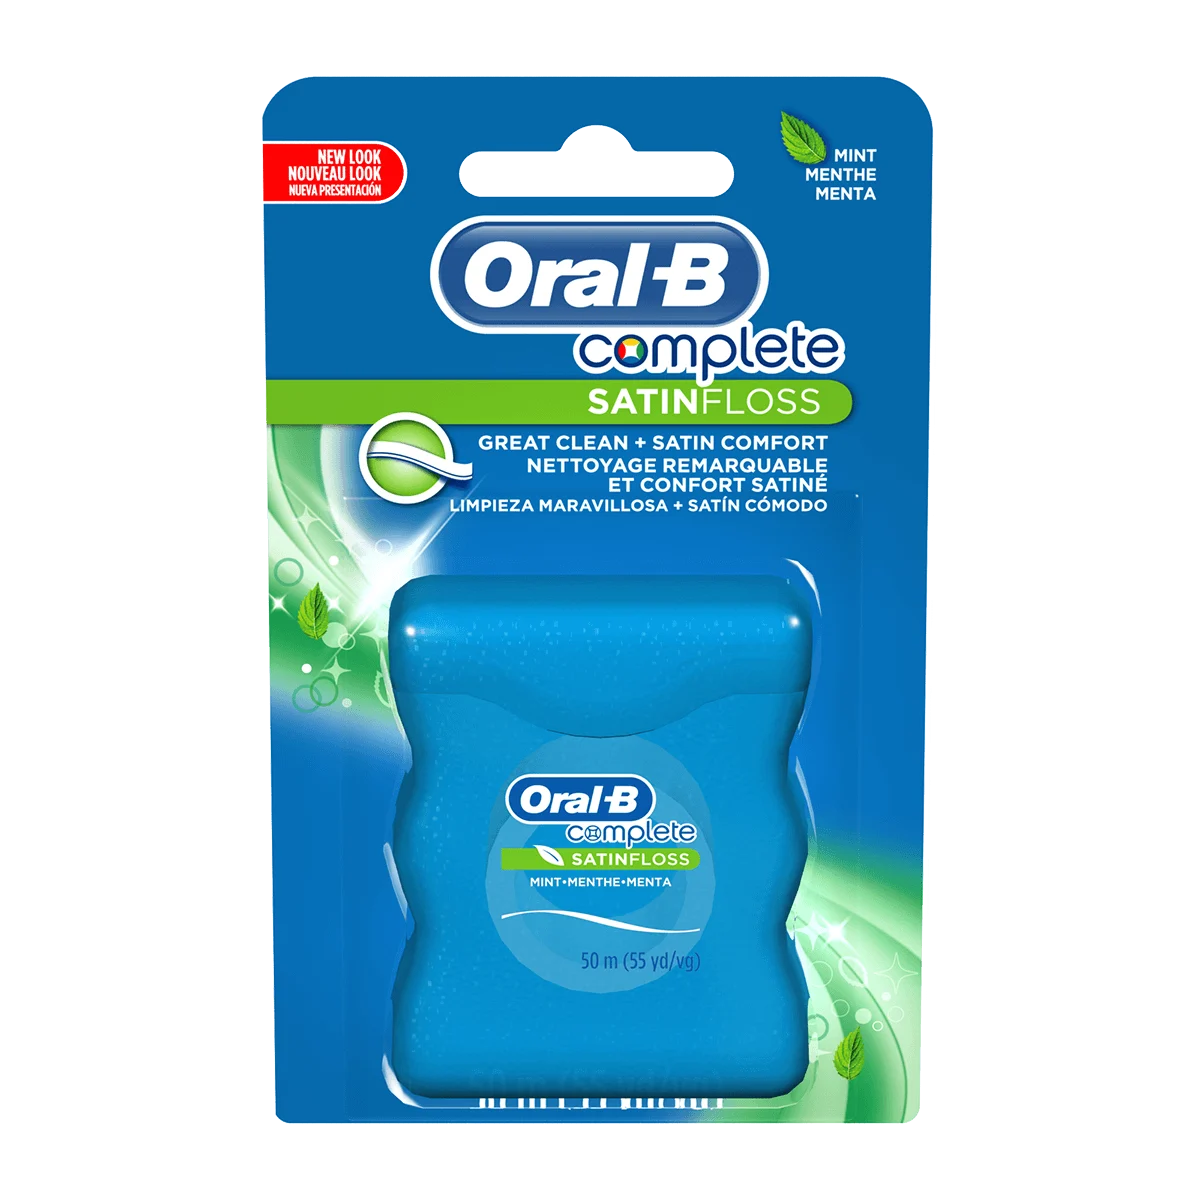 Oral-B Complete SATINfloss 